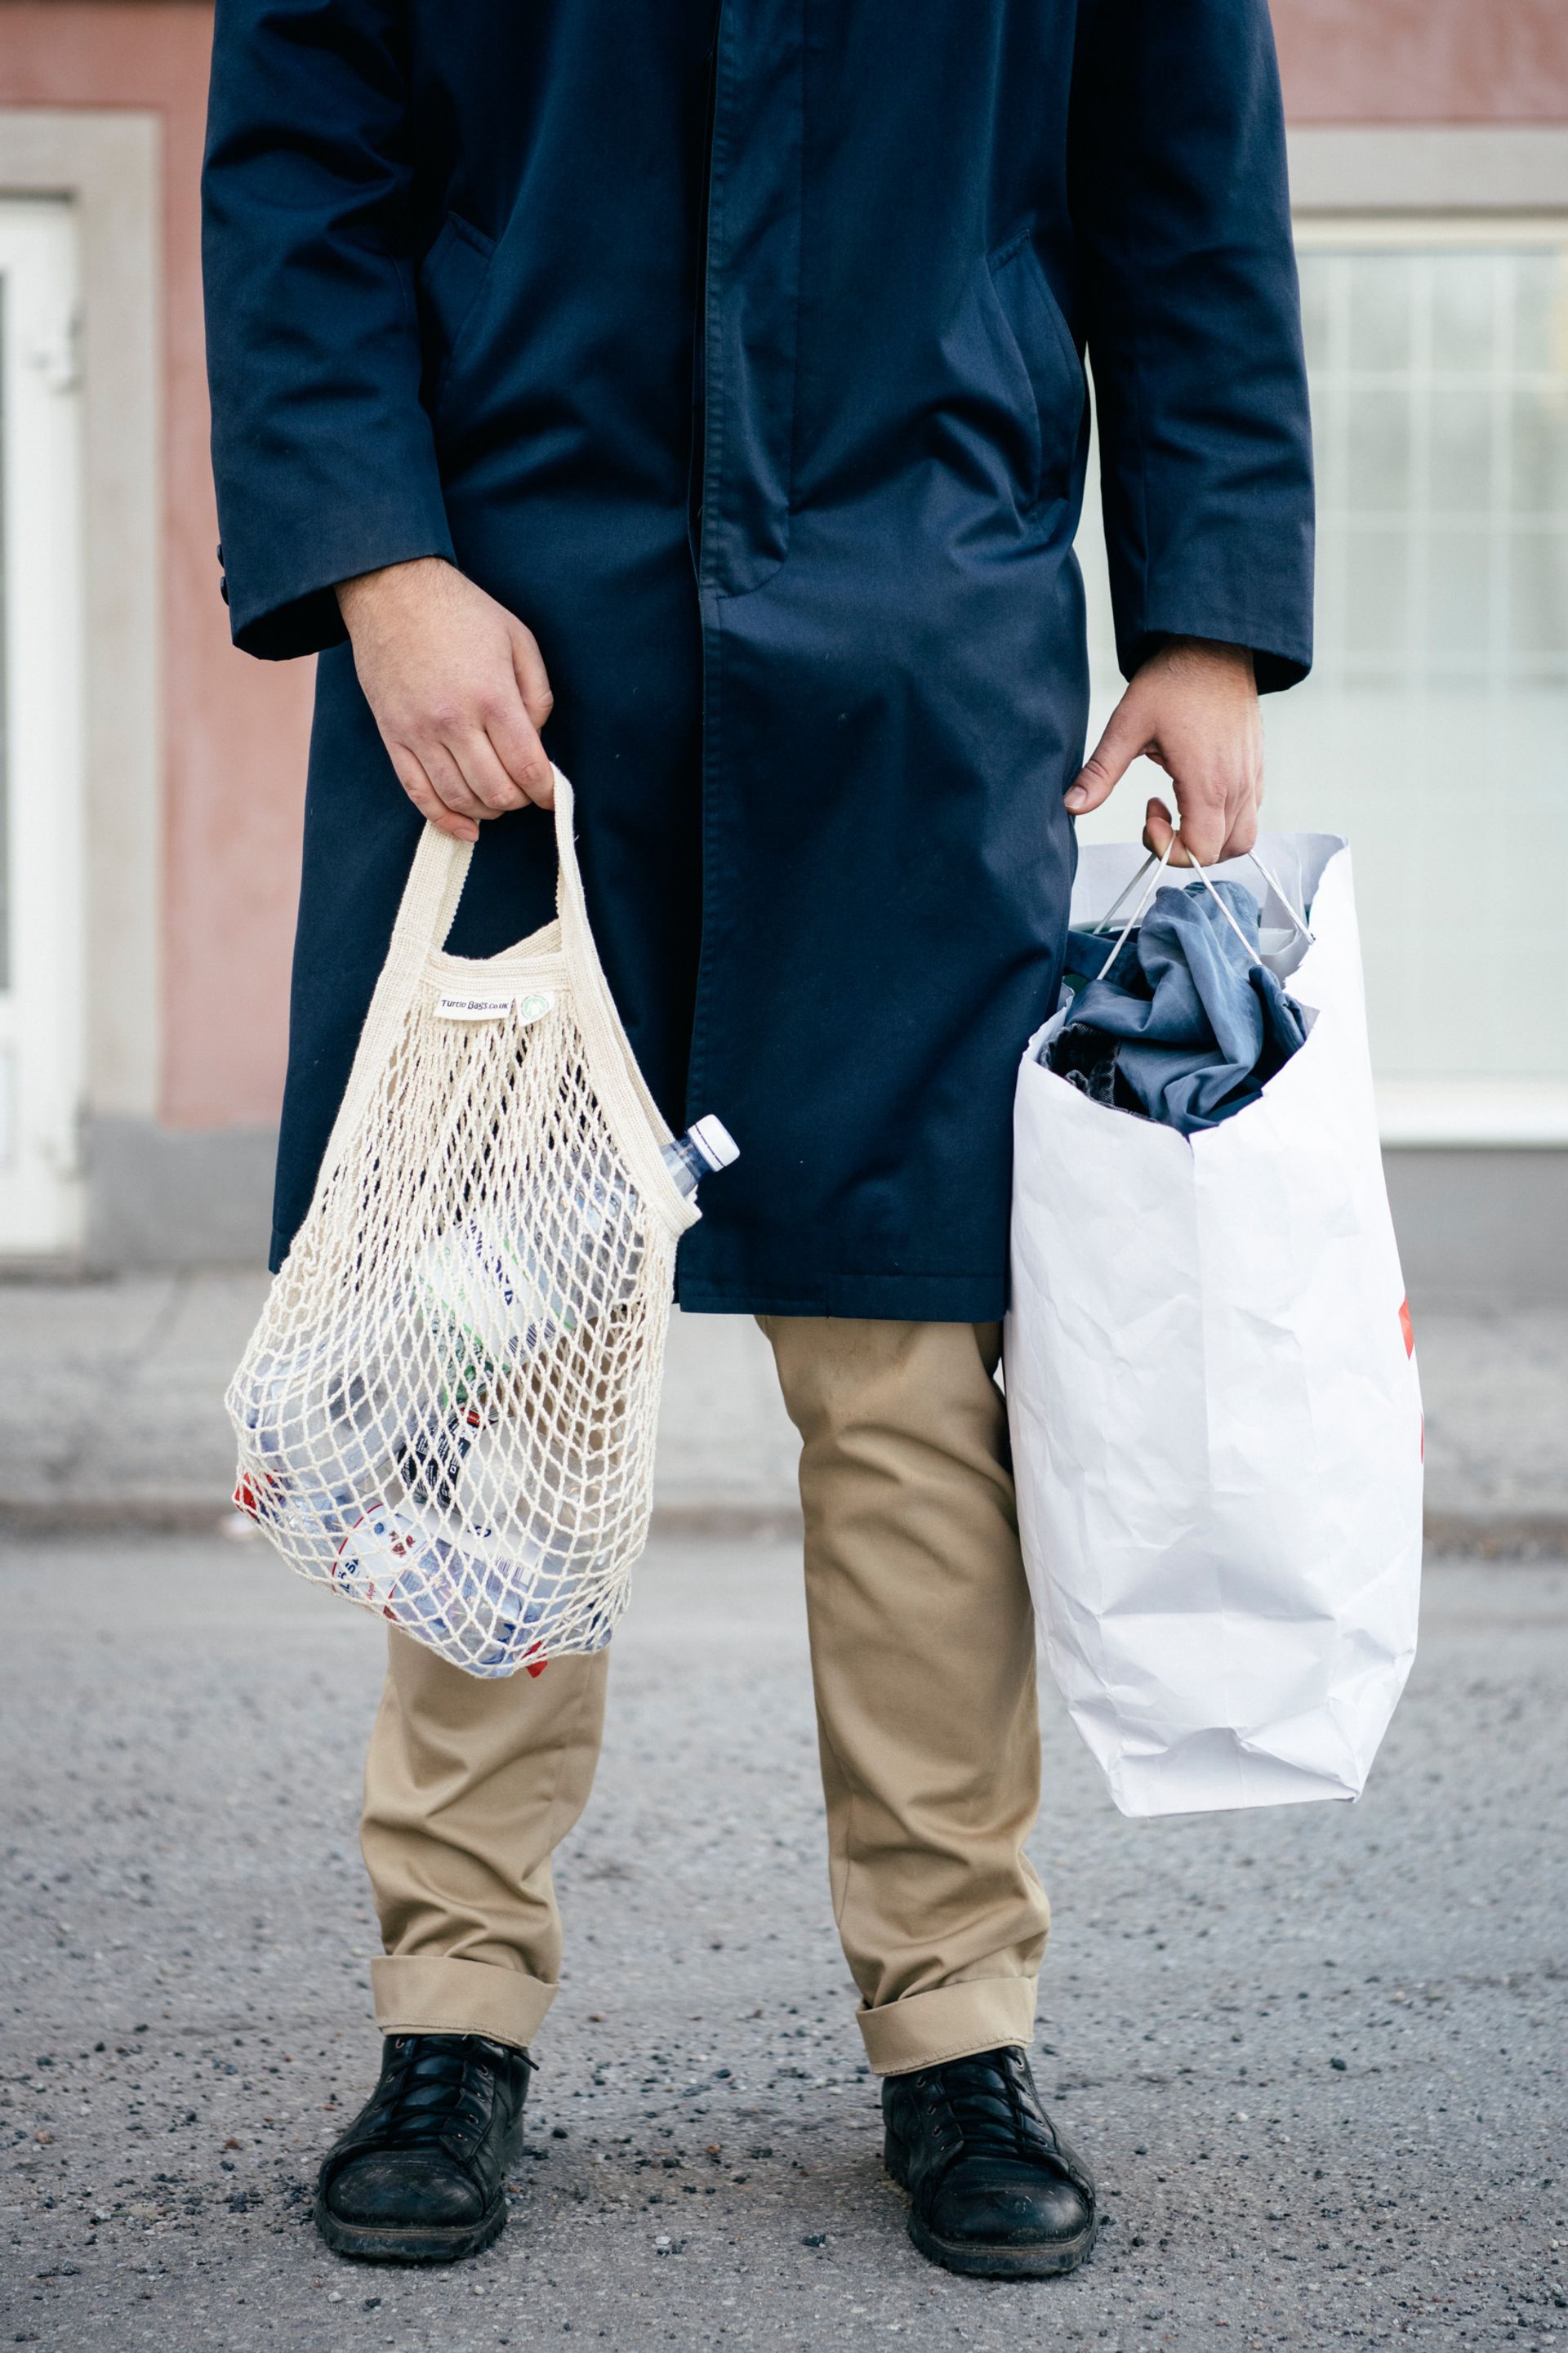 An outdoor lower body shot of a person holding a cloth bag with groceries in one hand and a paper bag in the other.